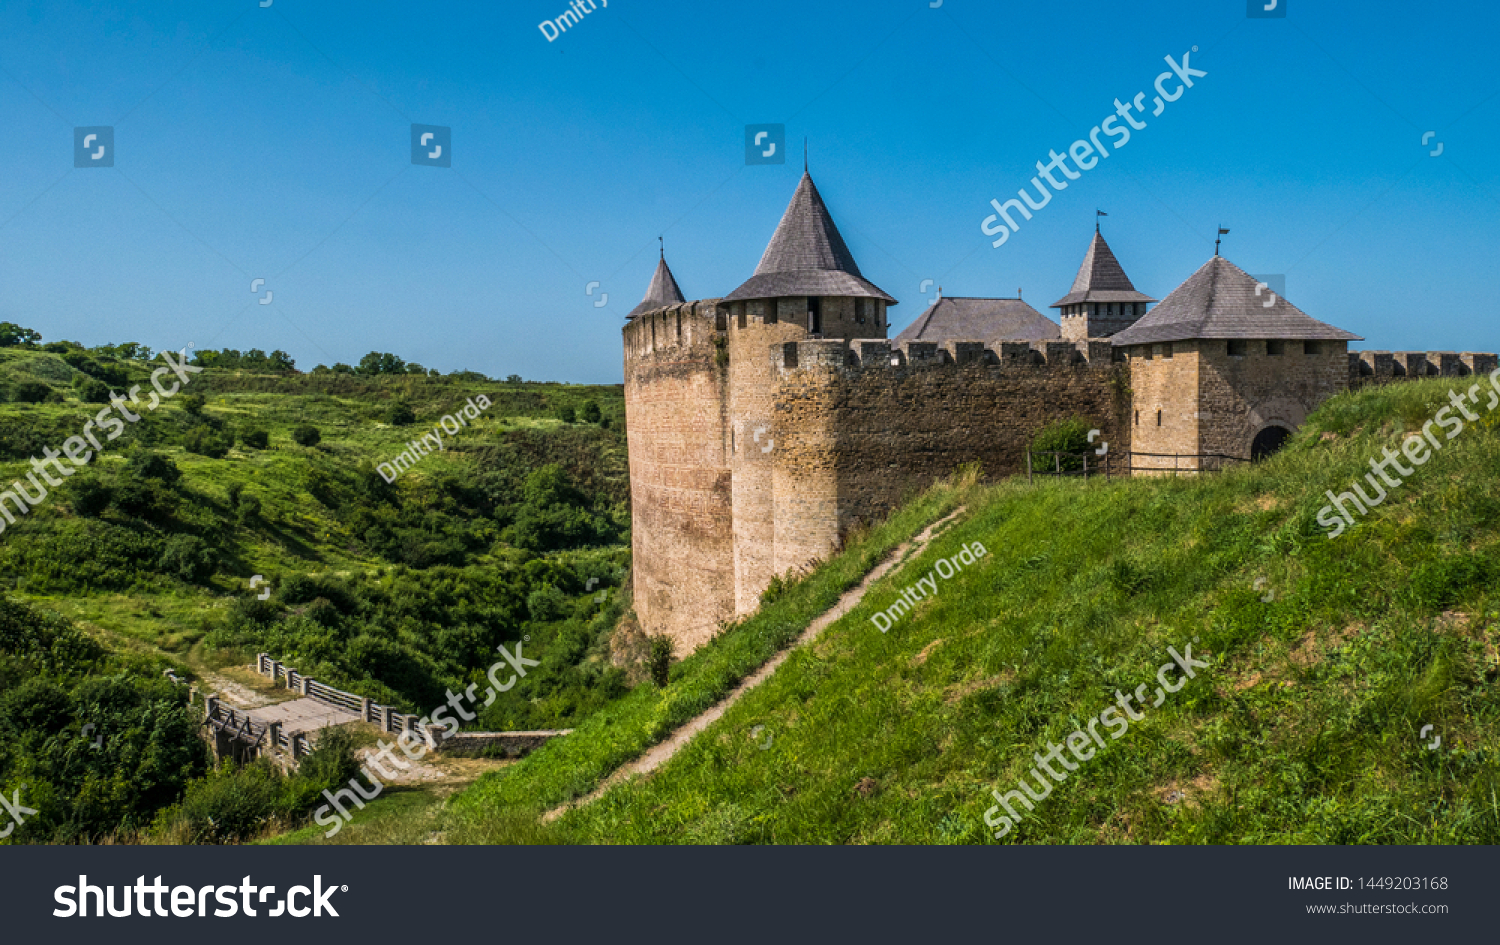 
defensive walls of the Khotyn fortress #1449203168